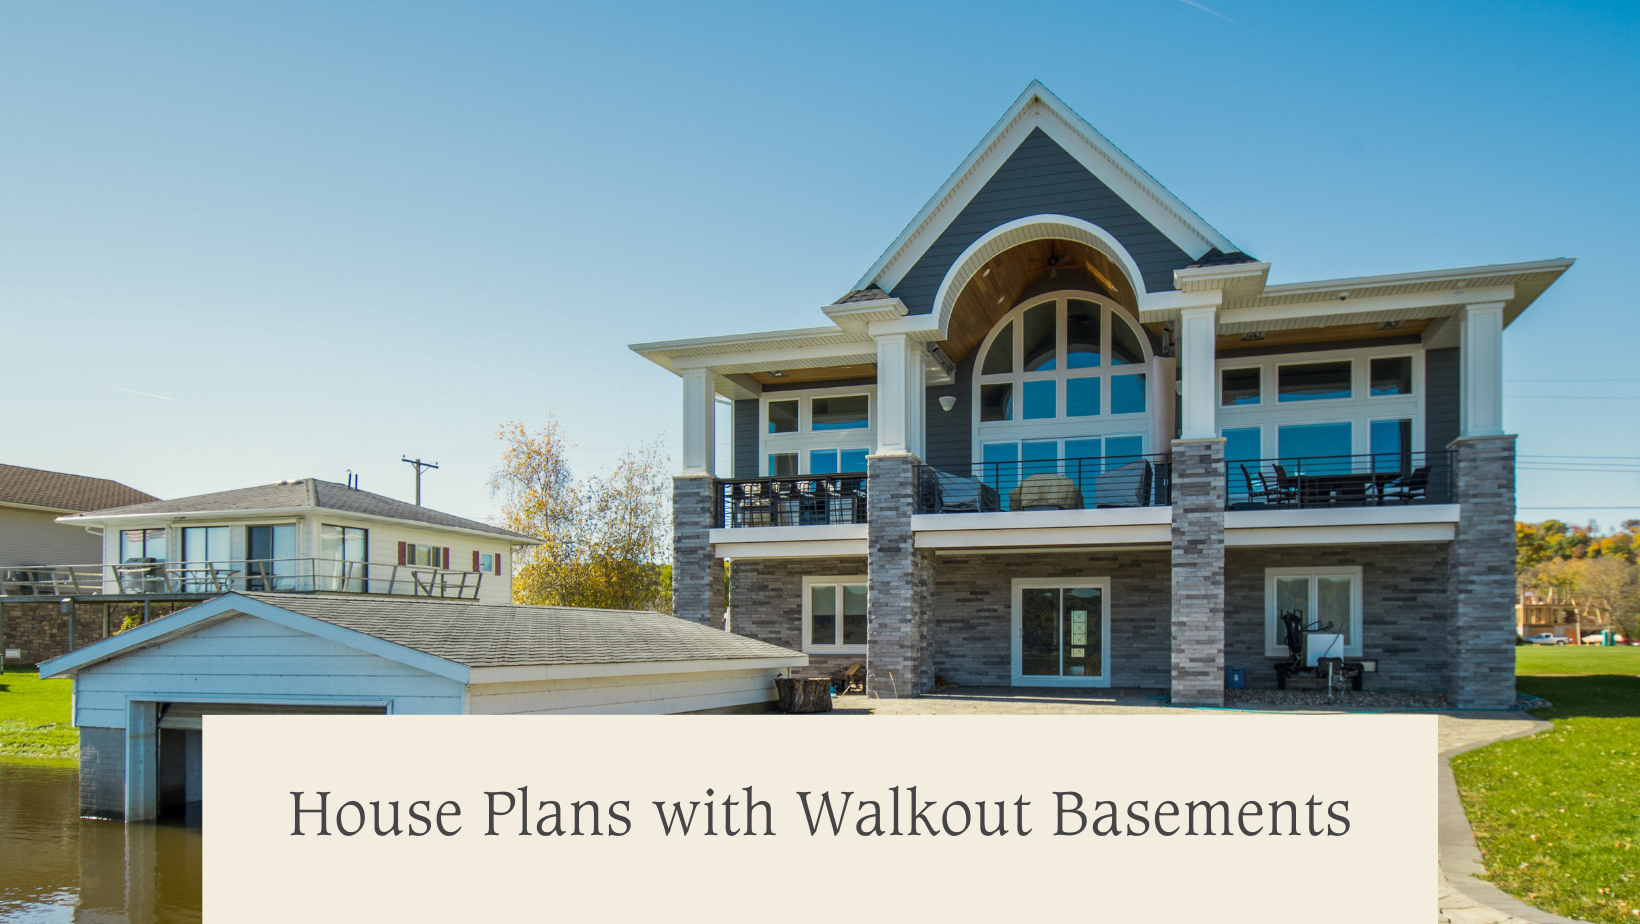 House Plans with Walkout Basements